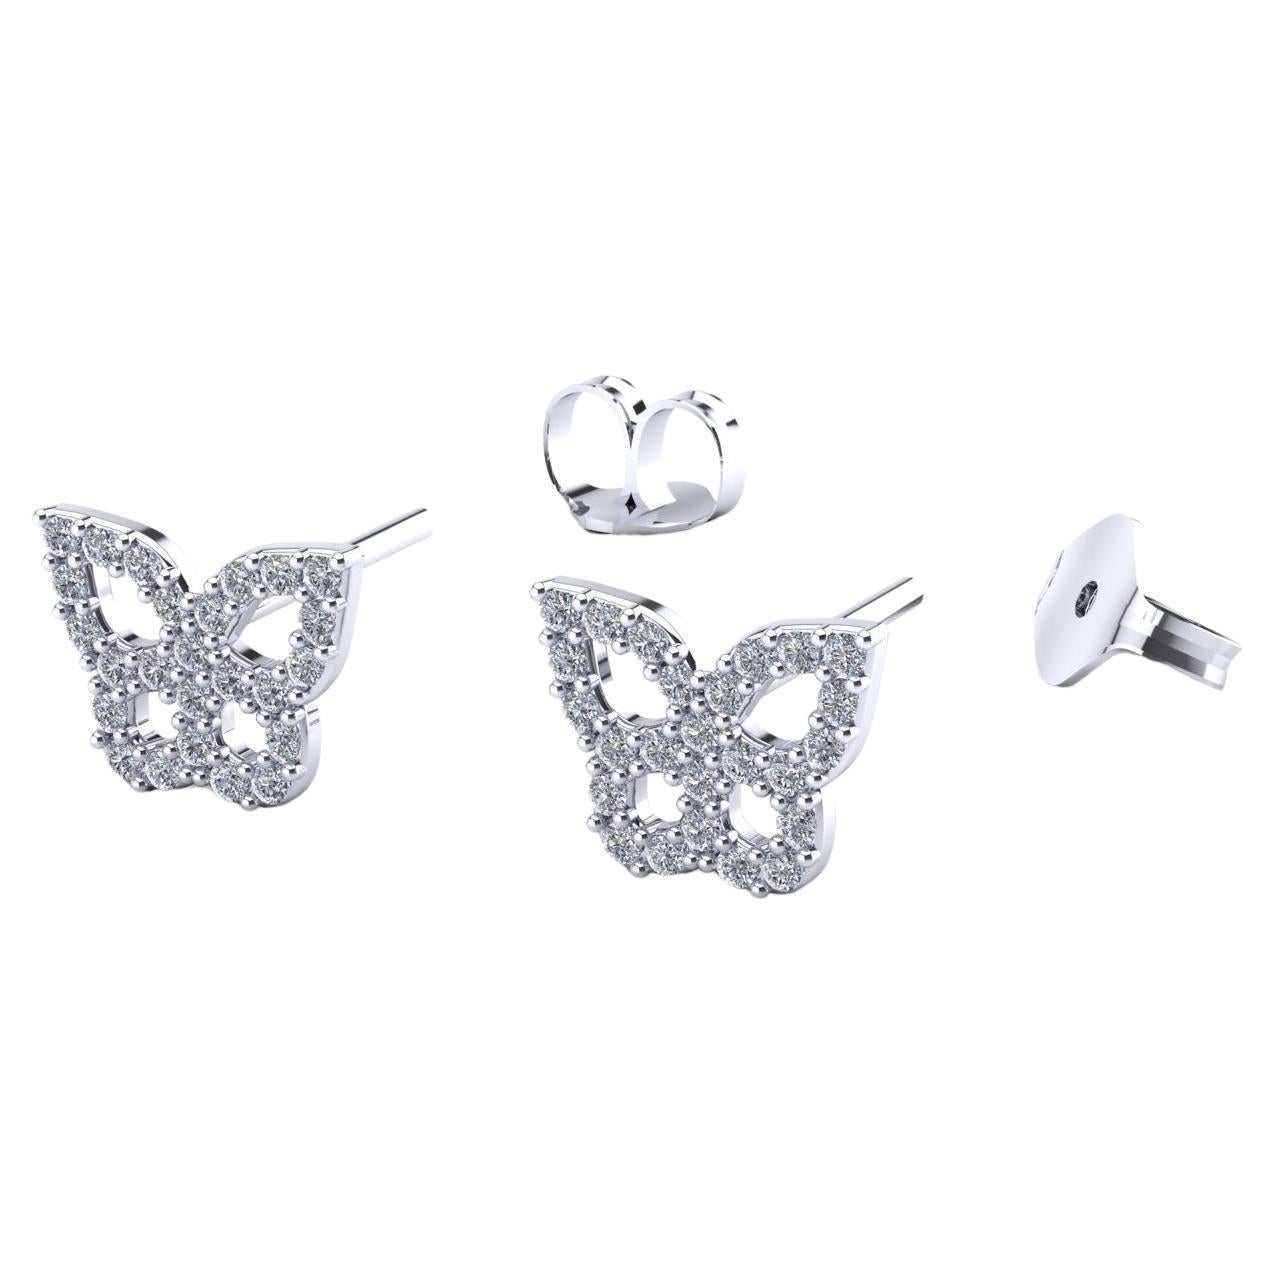 Fantasy Earrings "BFLY" with Natural Diamonds, White Gold 18kt, Made in Italy For Sale